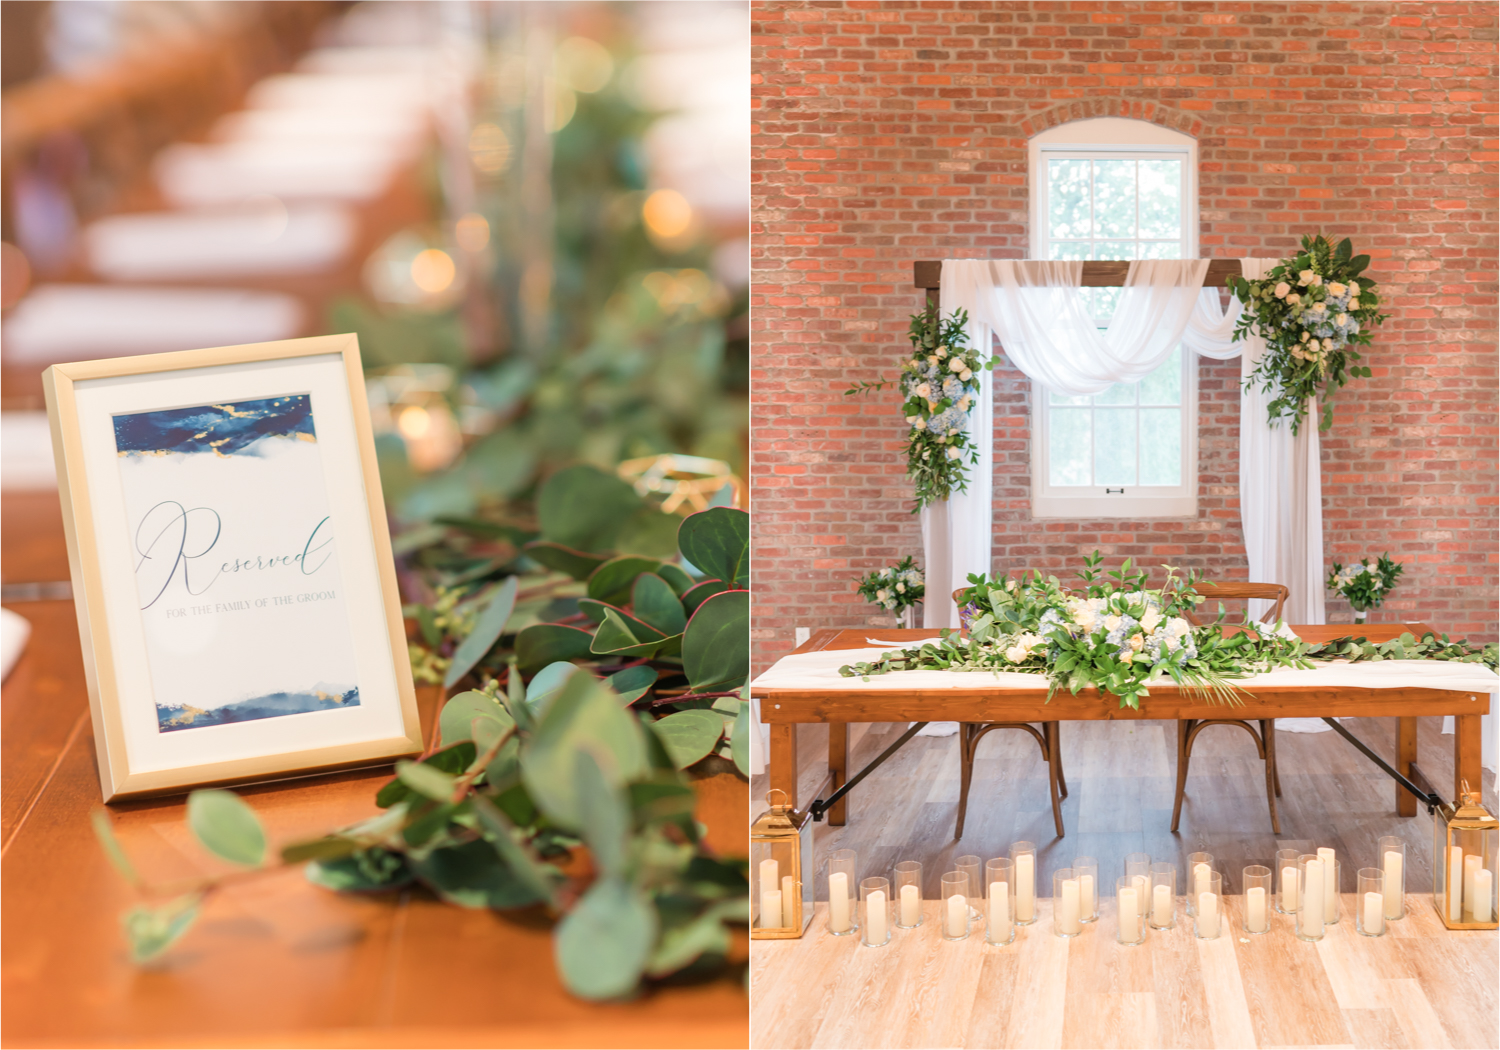 Romantic and Rustic Wedding at The Mill in Windsor | Britni Girard Photography | Colorado based wedding photography and videography team | Bride and groom entrance to reception